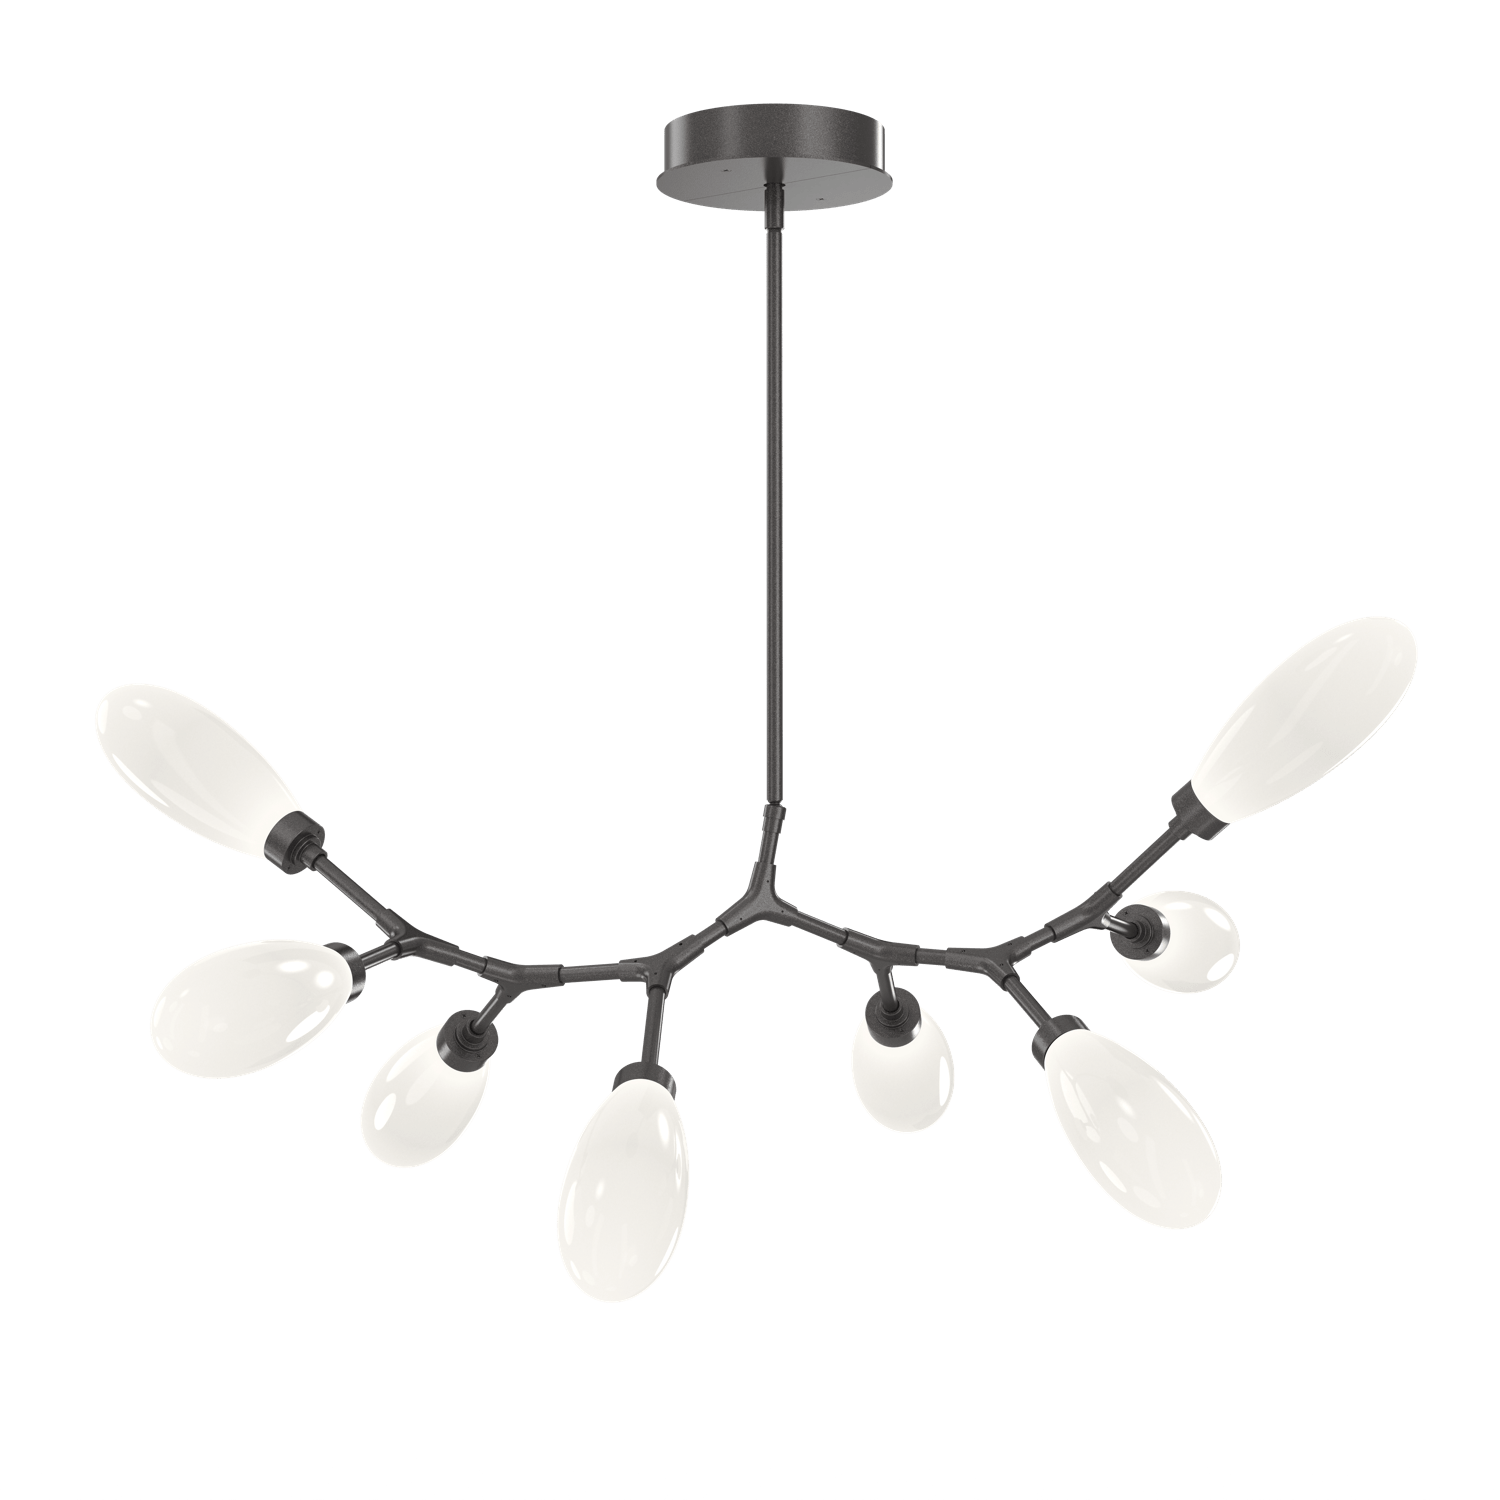 PLB0071-BB-GP-WL-LL-Hammerton-Studio-Fiori-8-light-organic-branch-chandelier-with-graphite-finish-and-opal-white-glass-shades-and-LED-lamping